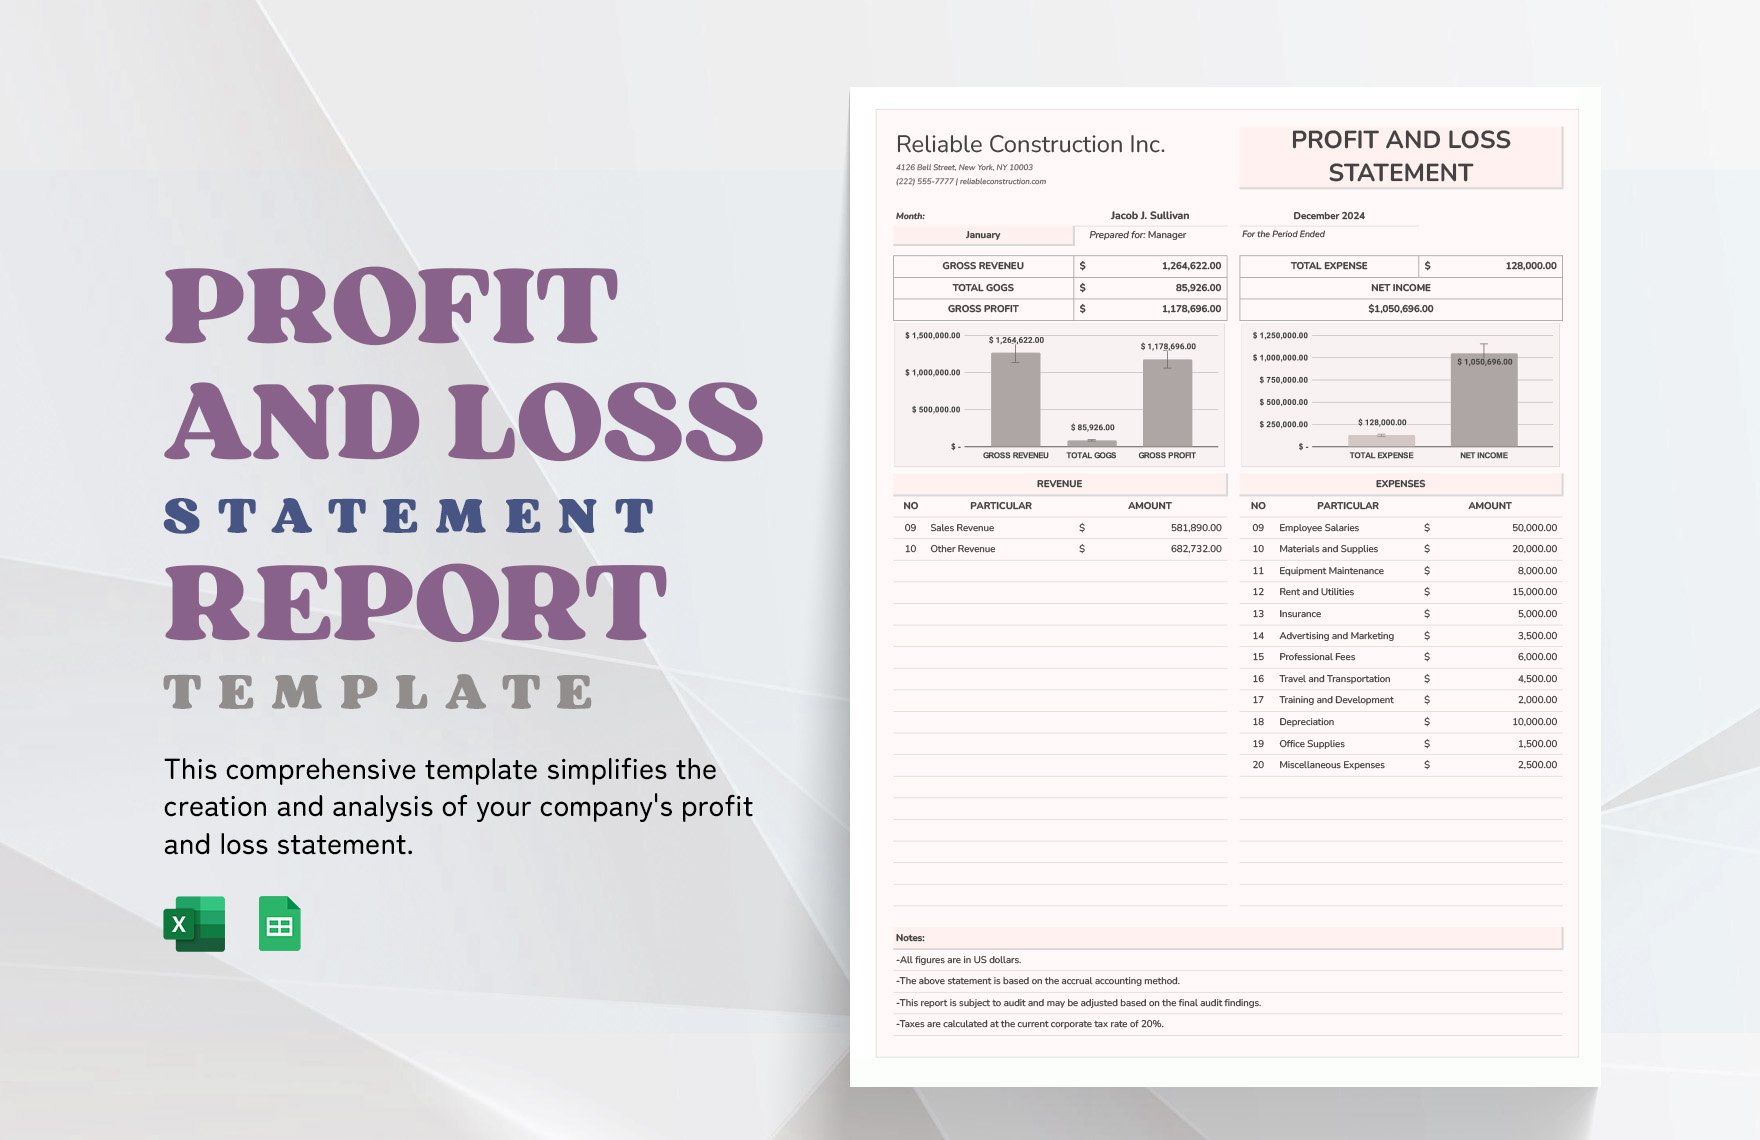 Profit and Loss Statement Report Template